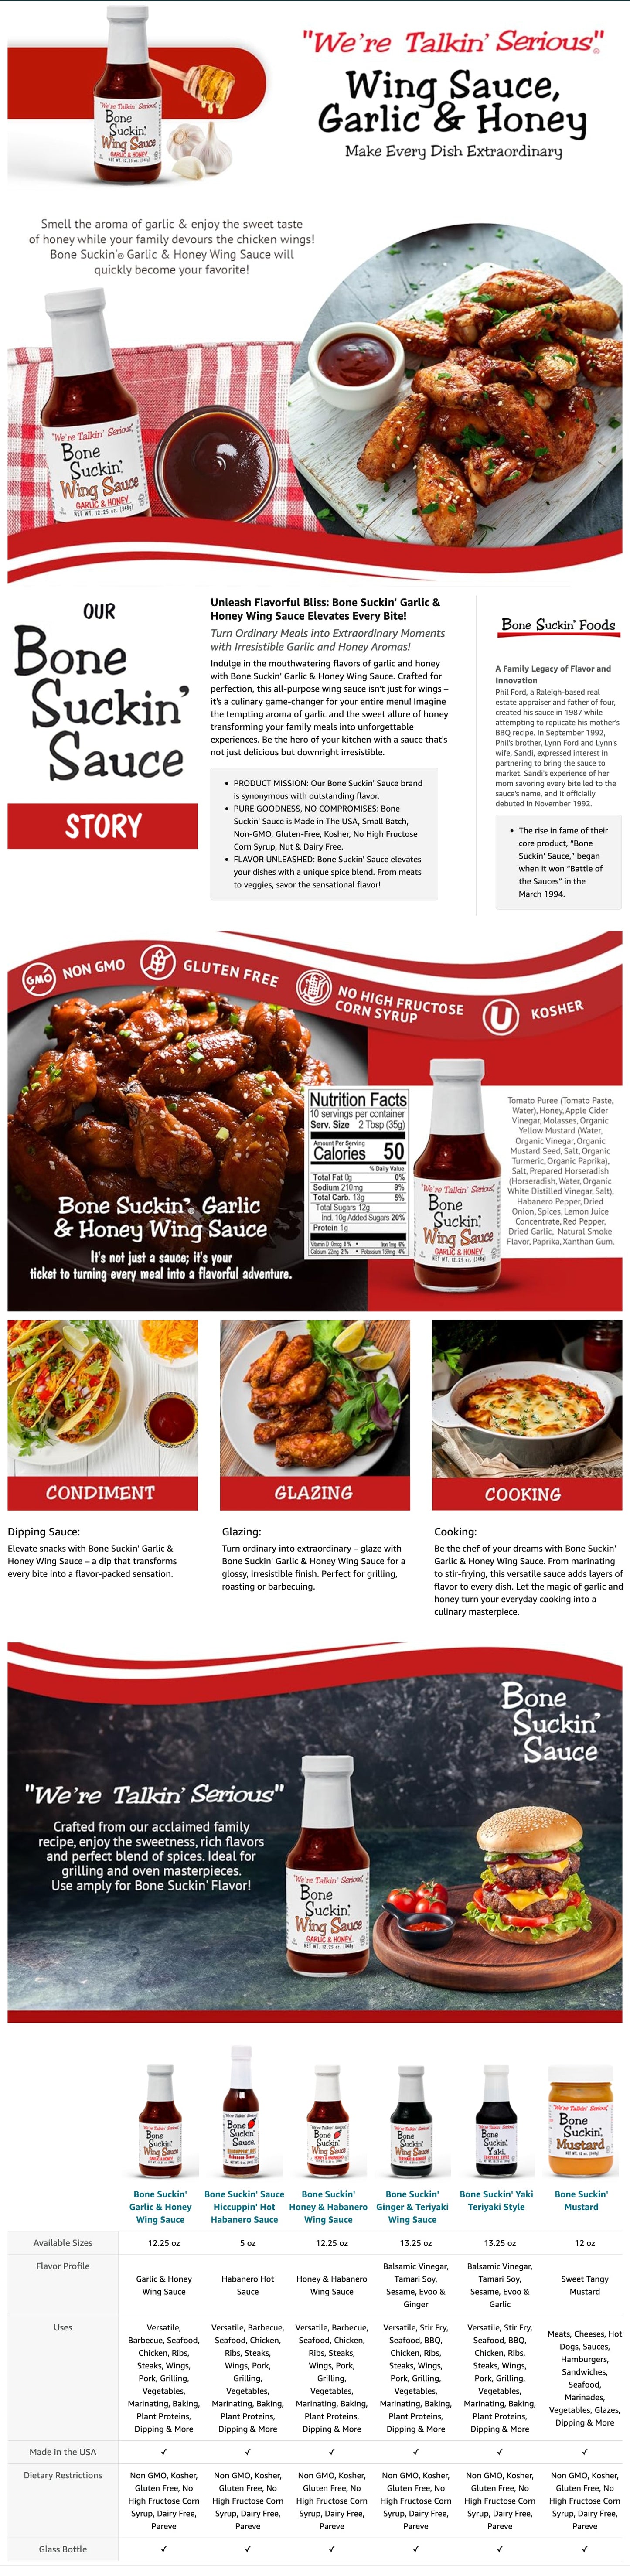 Bone Suckin' Sauce Garlic & Honey Wing Sauce is NON-GMO, Gluten Free, No high fructose corn syrup, kosher, pareve dairy free, 3rd party verified, glass bottles, and nut free.